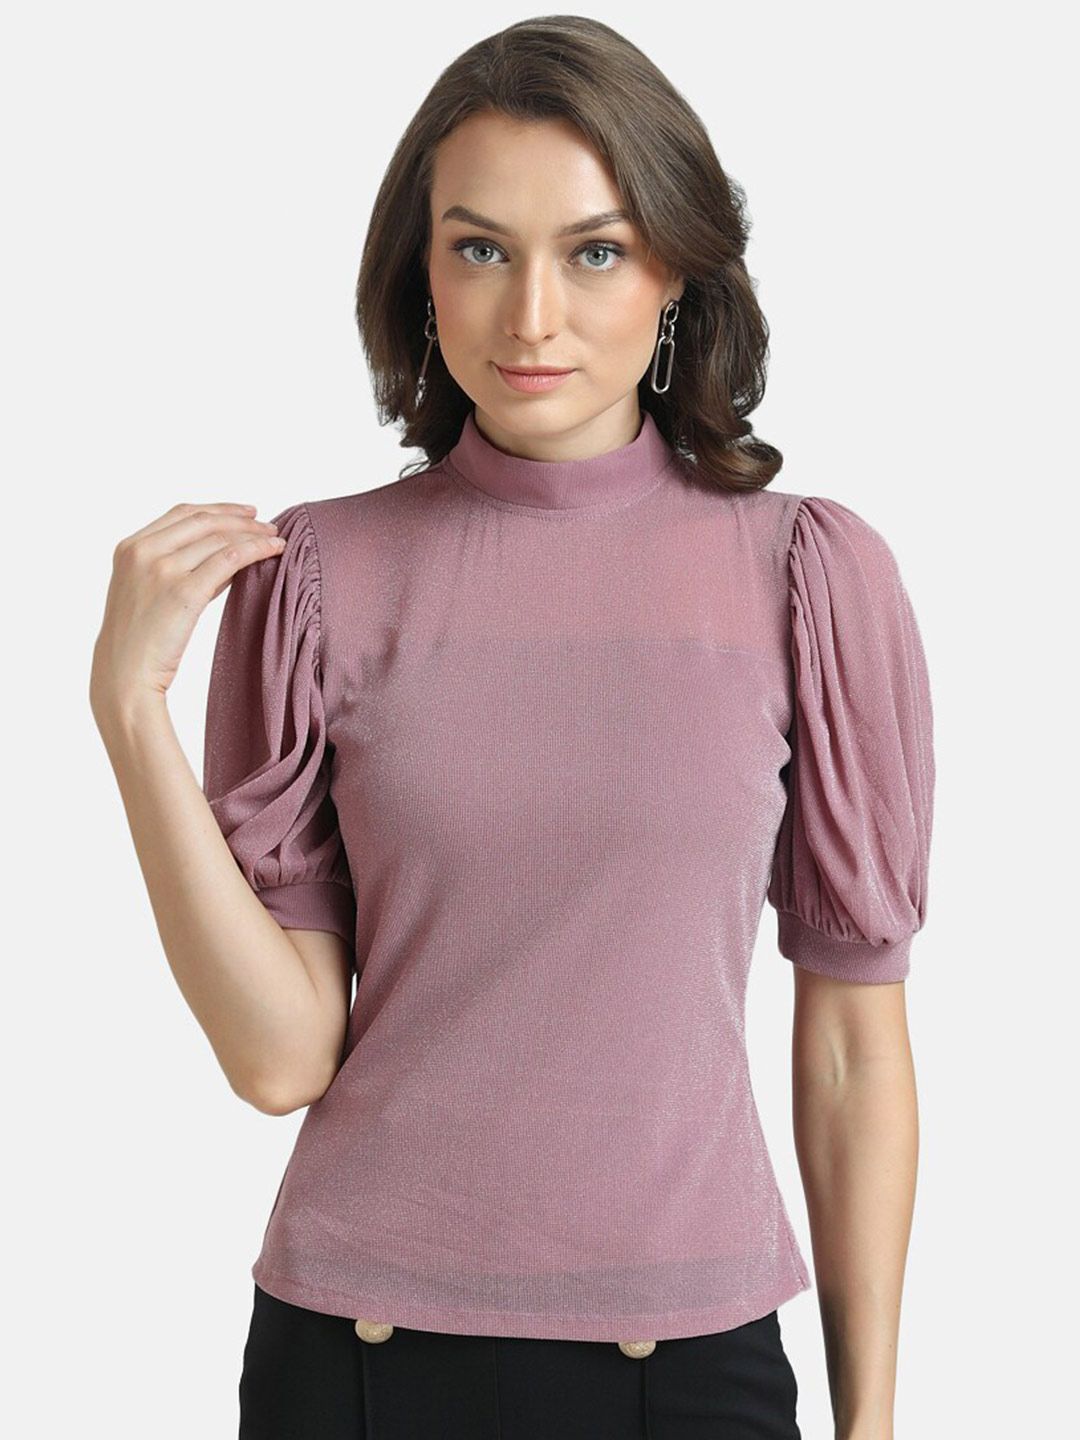 Kazo High Neck Puff Sleeves Top Price in India